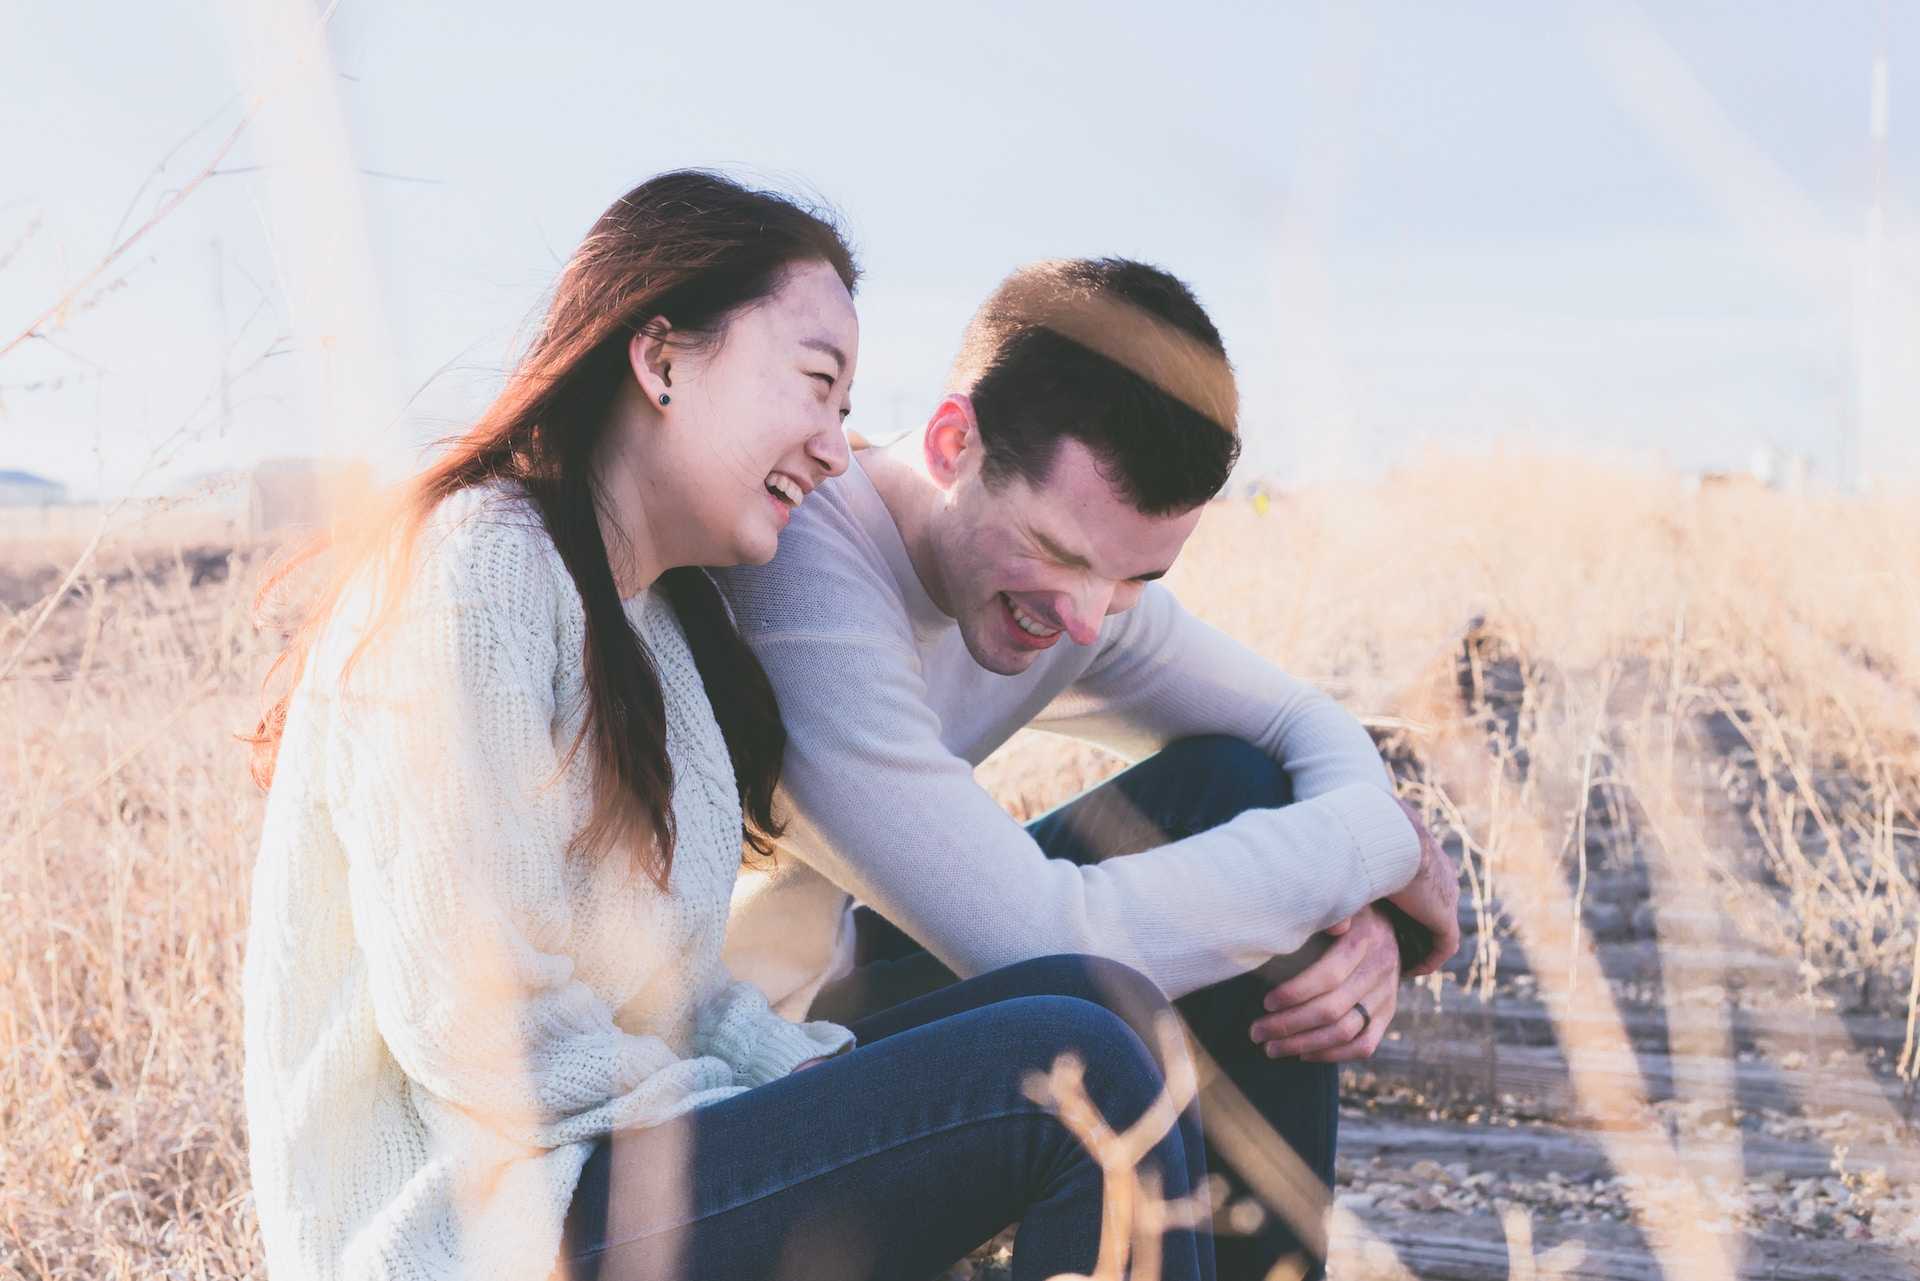 couple laughing in a field saying funny valentine's day quotes for him